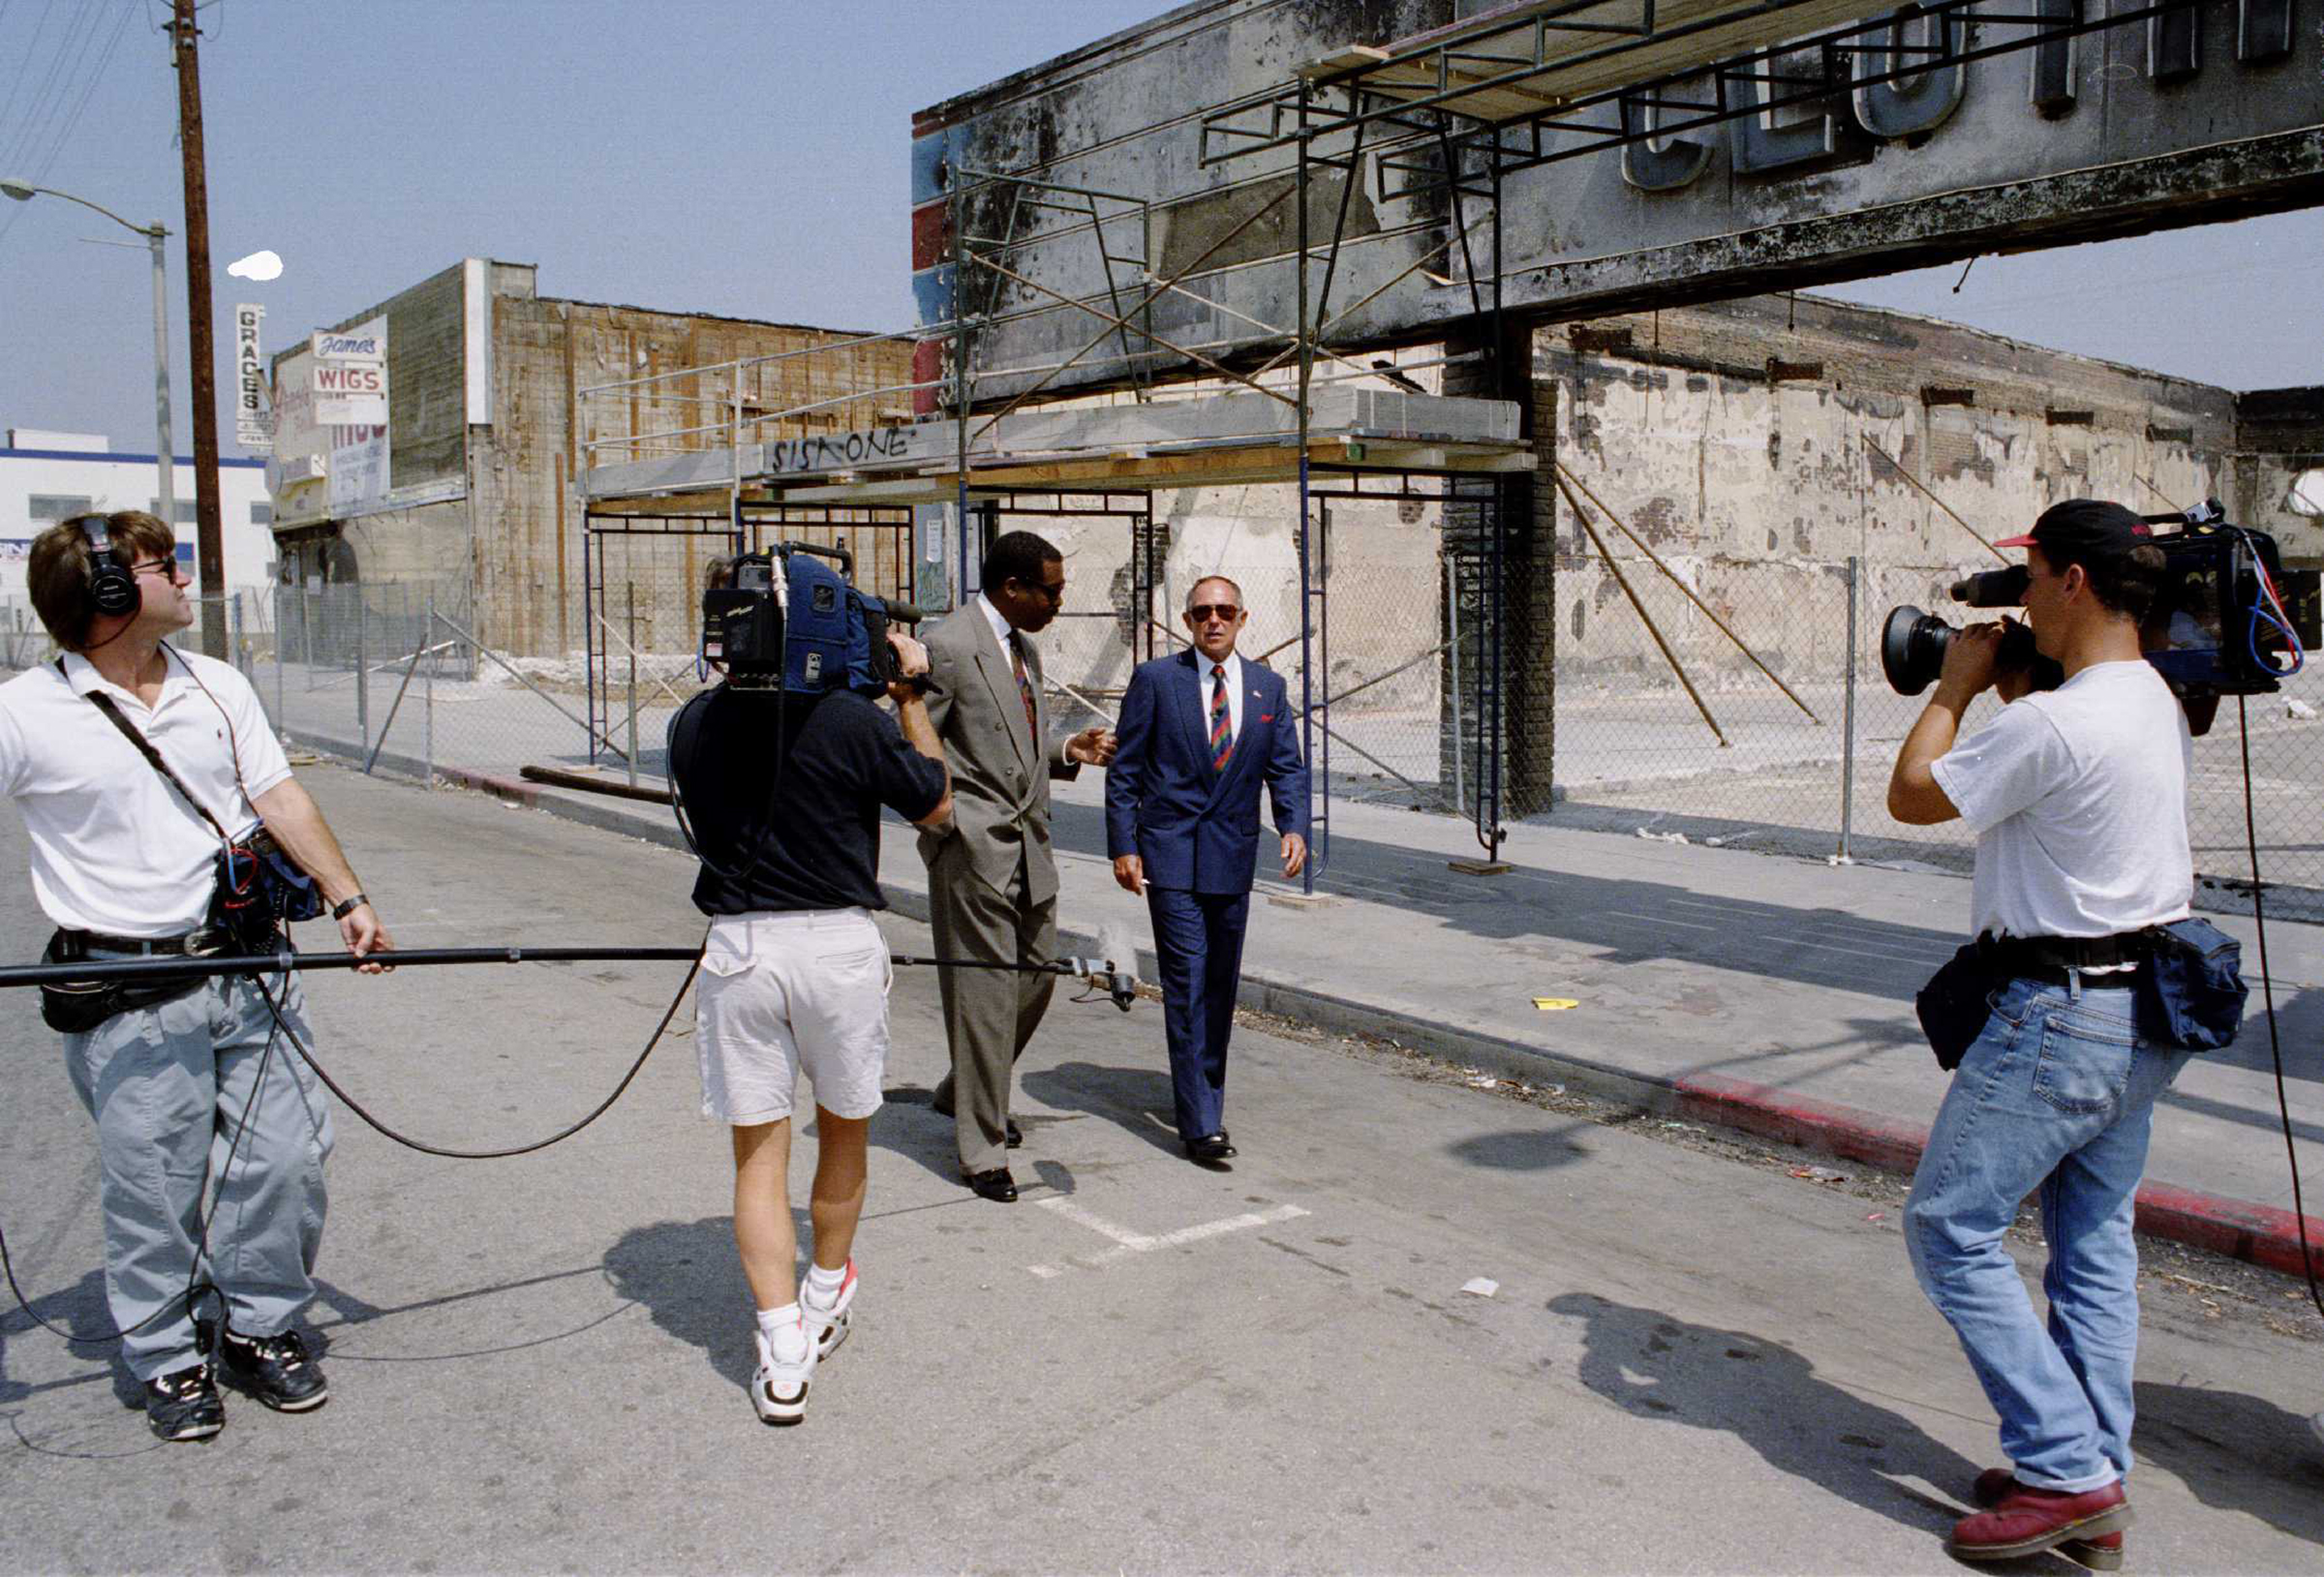 Daryl Gates, the former police chief, during an interview with a television station close to the scene where the riots began. (Paul Harris—Getty Images)